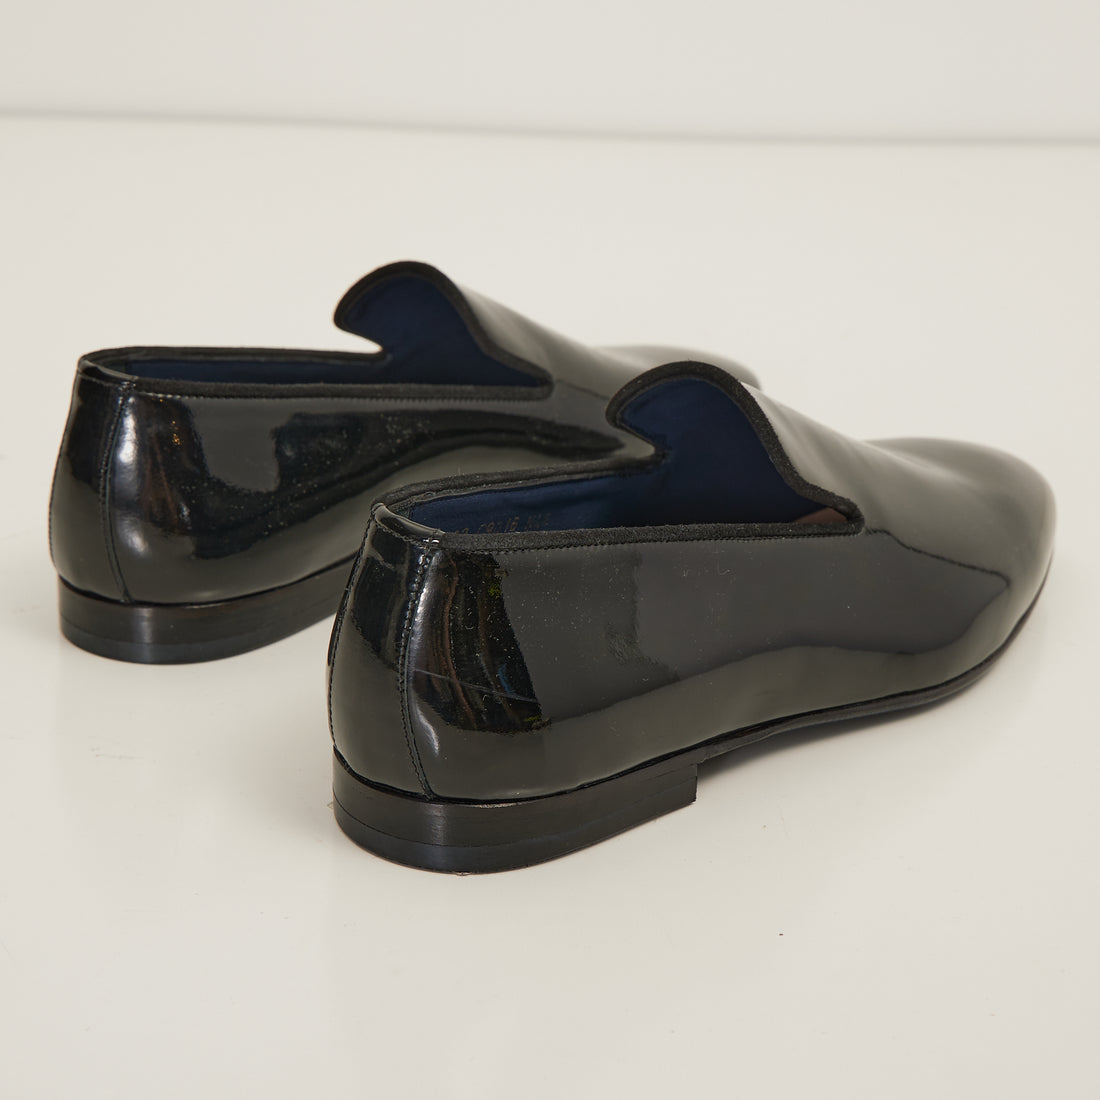 N° C9016 THE FORMAL LEATHER LOAFER - BLACK PATENT